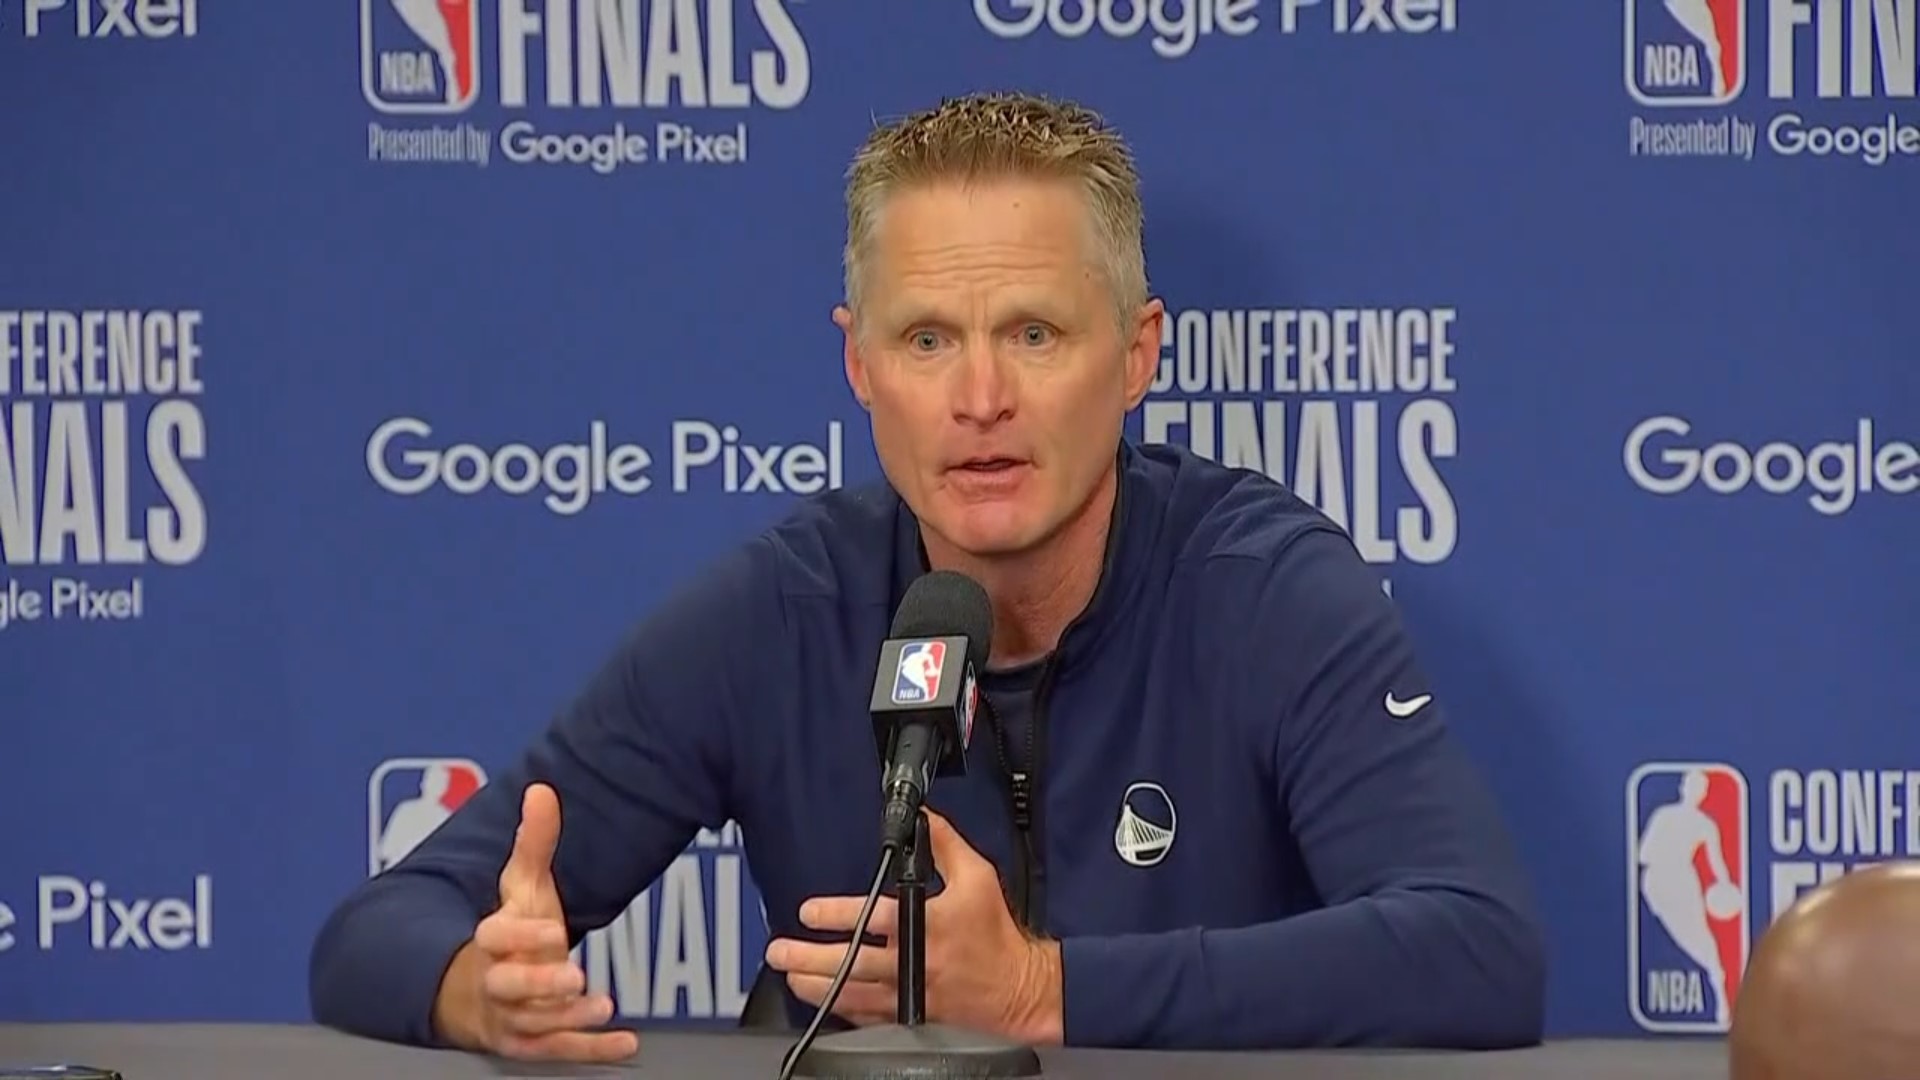 Before Game 4 of the NBA Western Conference Finals, Kerr delivered an impassioned plea, calling for change: "When are we going to do something?"